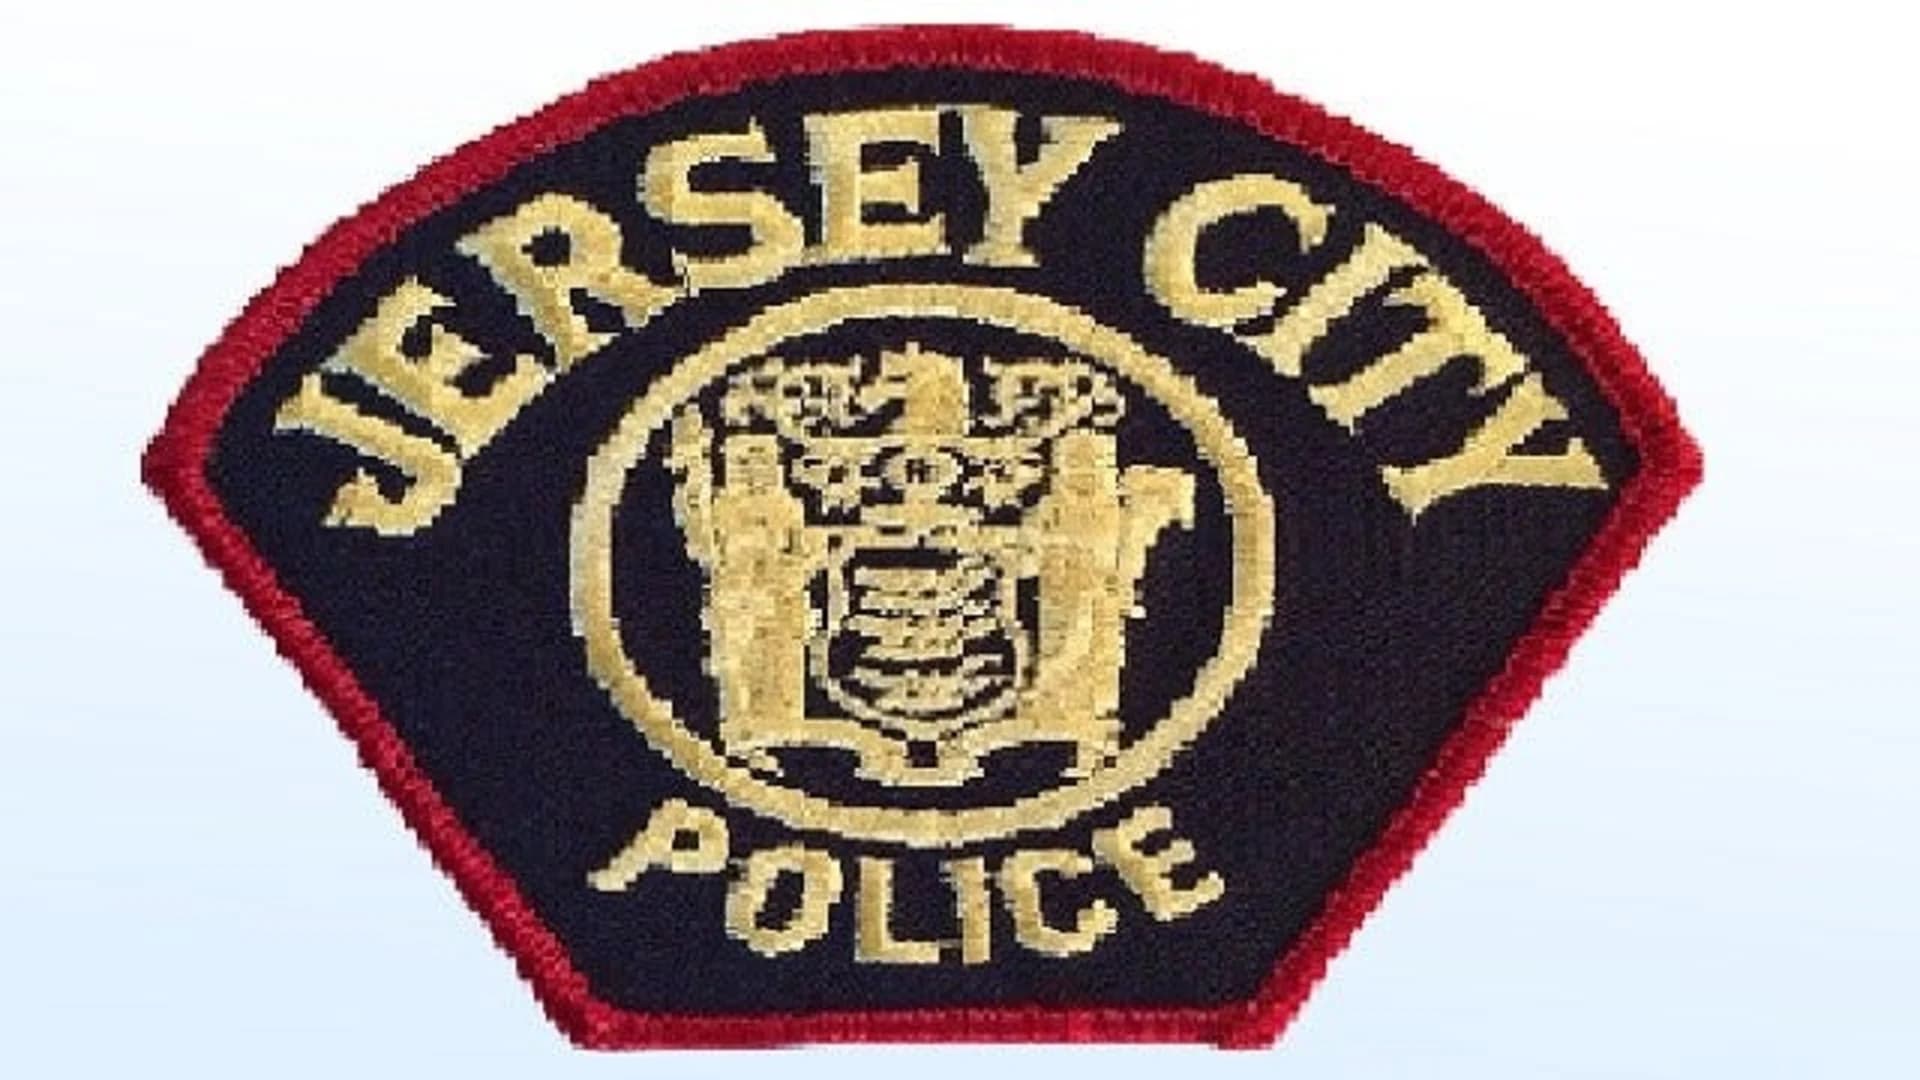 Jersey City cracking down on off-duty jobs for police